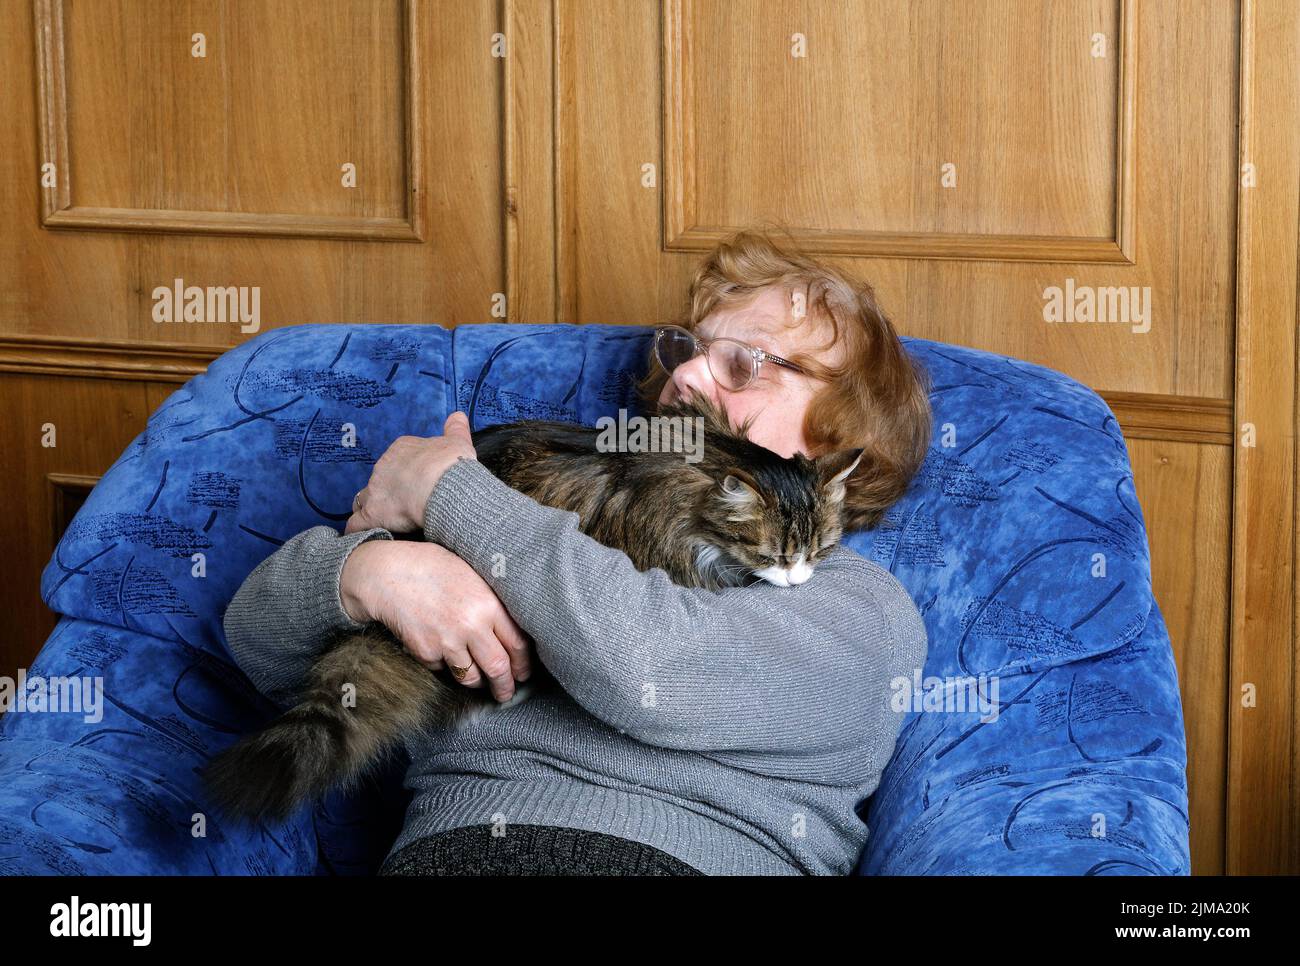 Old woman asleep in a chair in an embrace with a cat Stock Photo